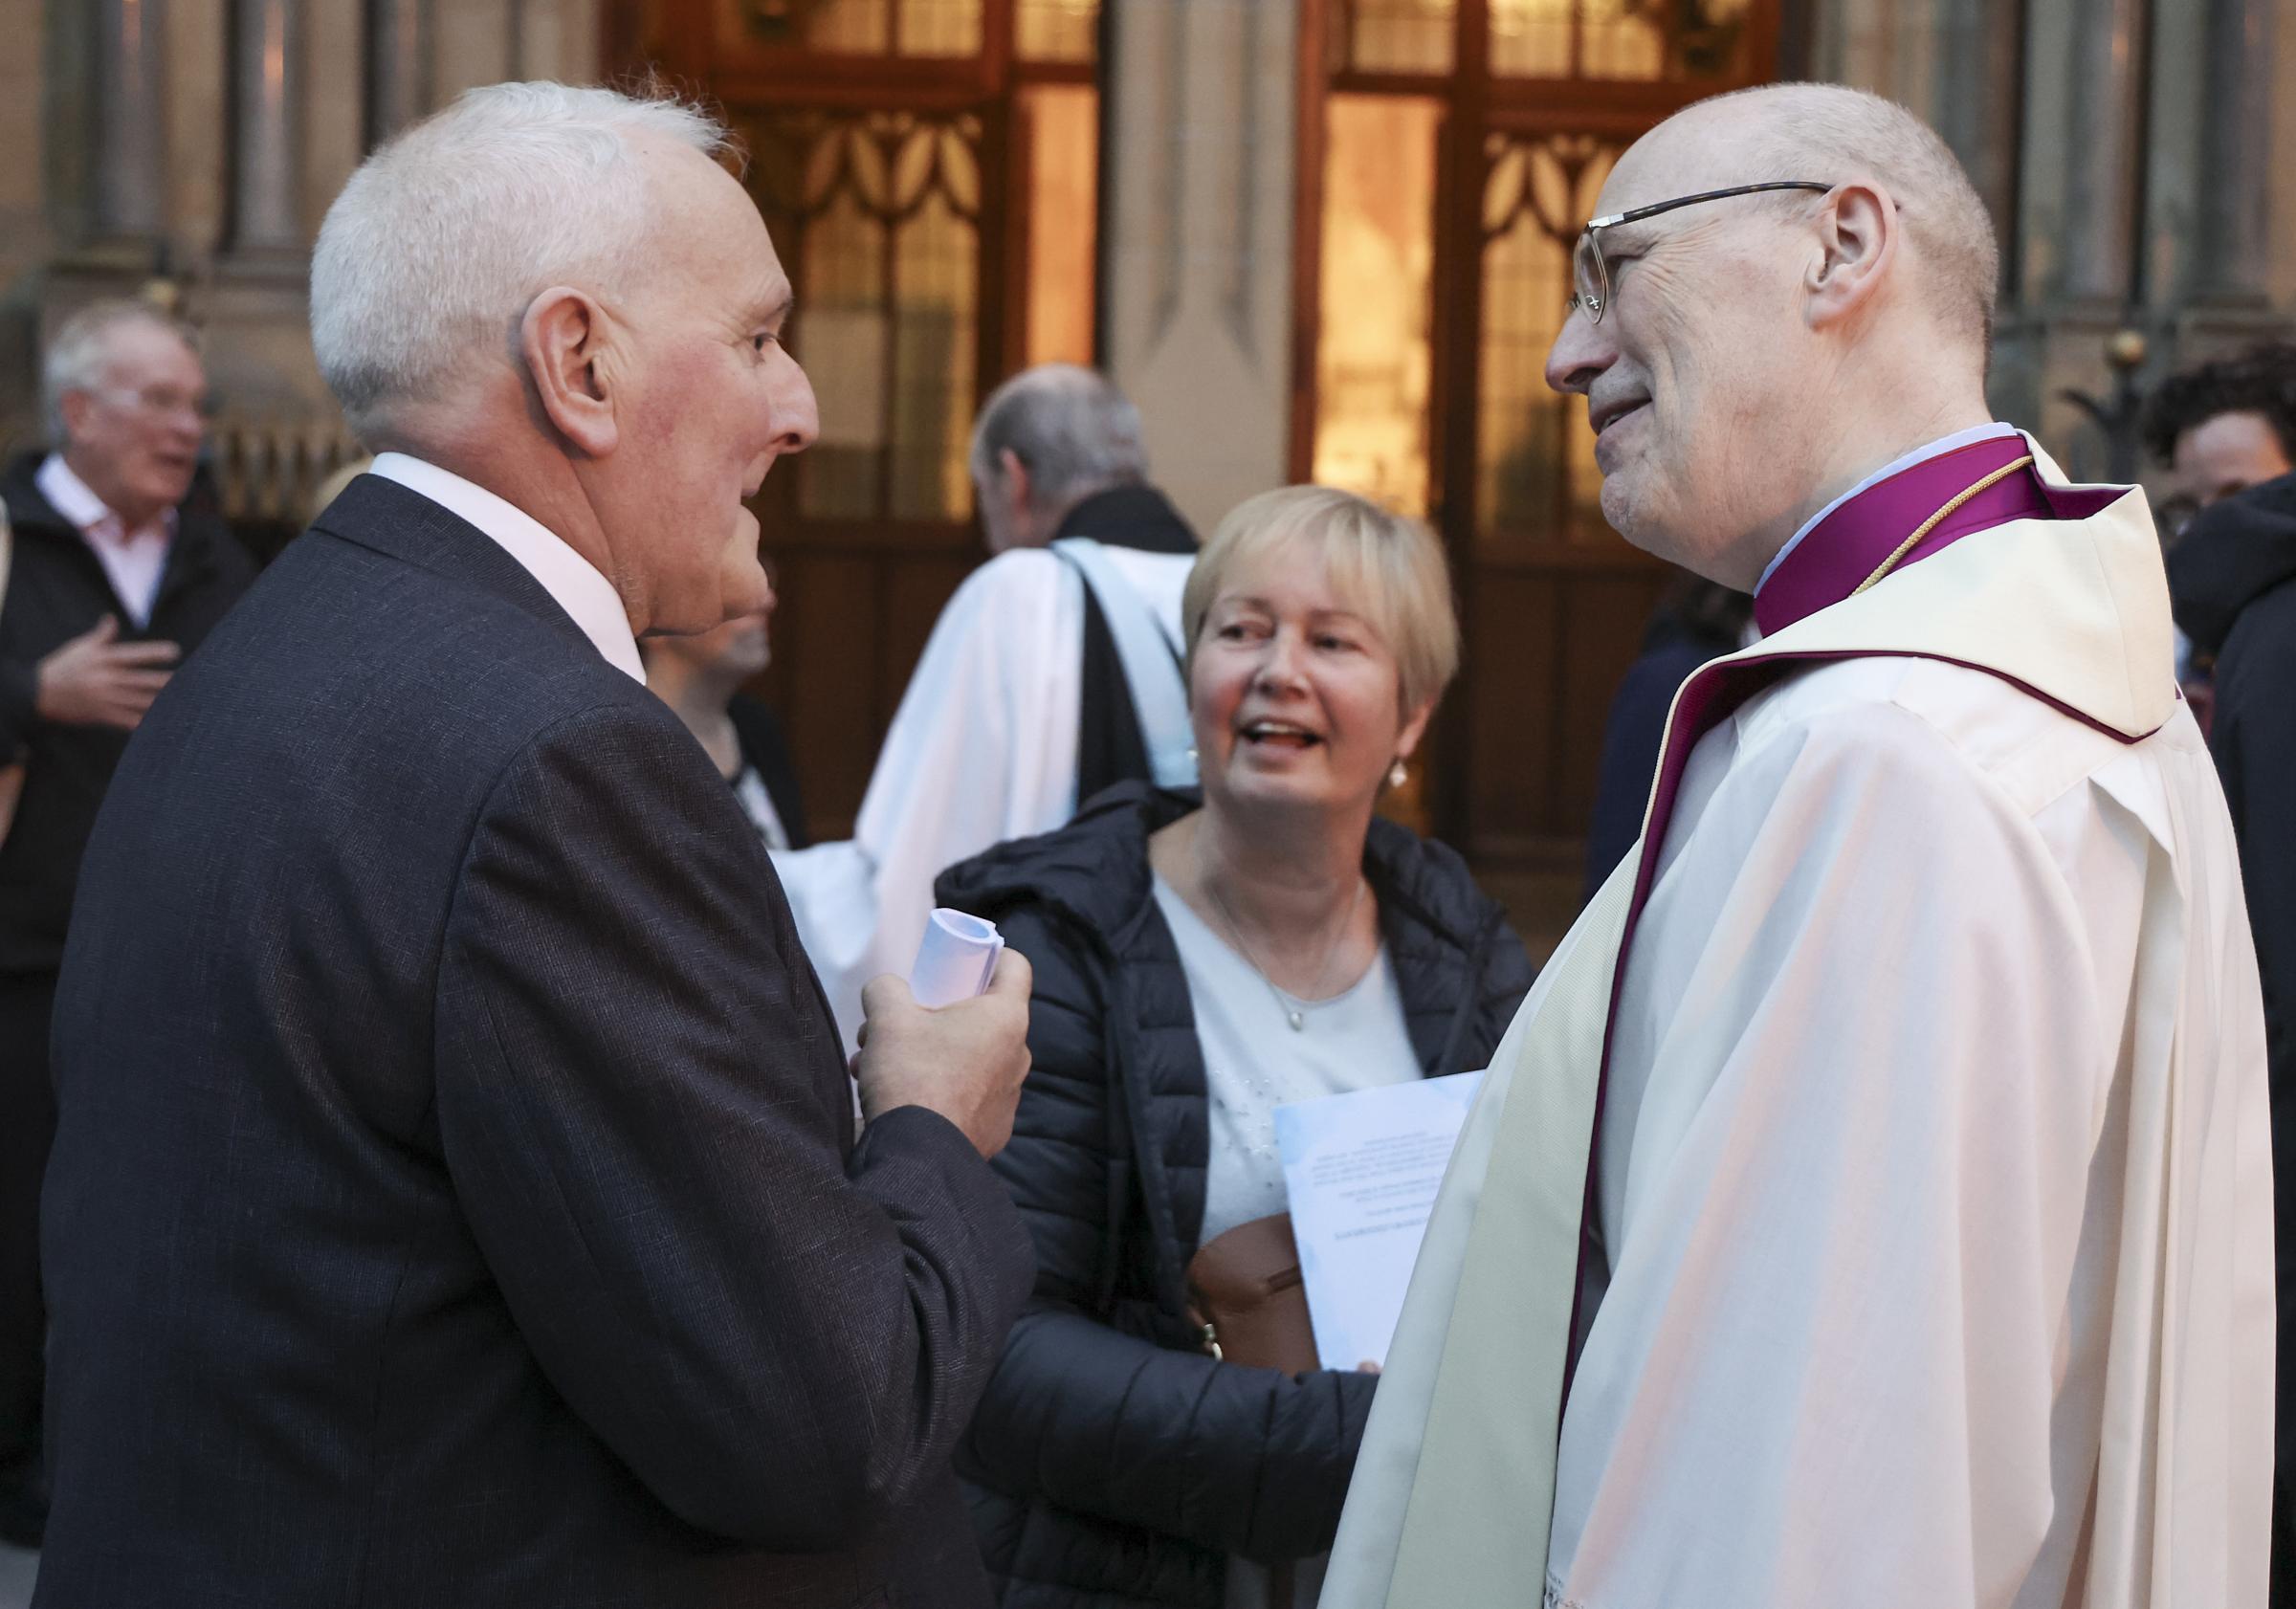 The Right Rev. Monsignor Peter OReilly, speaking to George Beacom, MBE, after the Service of Reflection for Her Majesty Queen Elizabeth II.